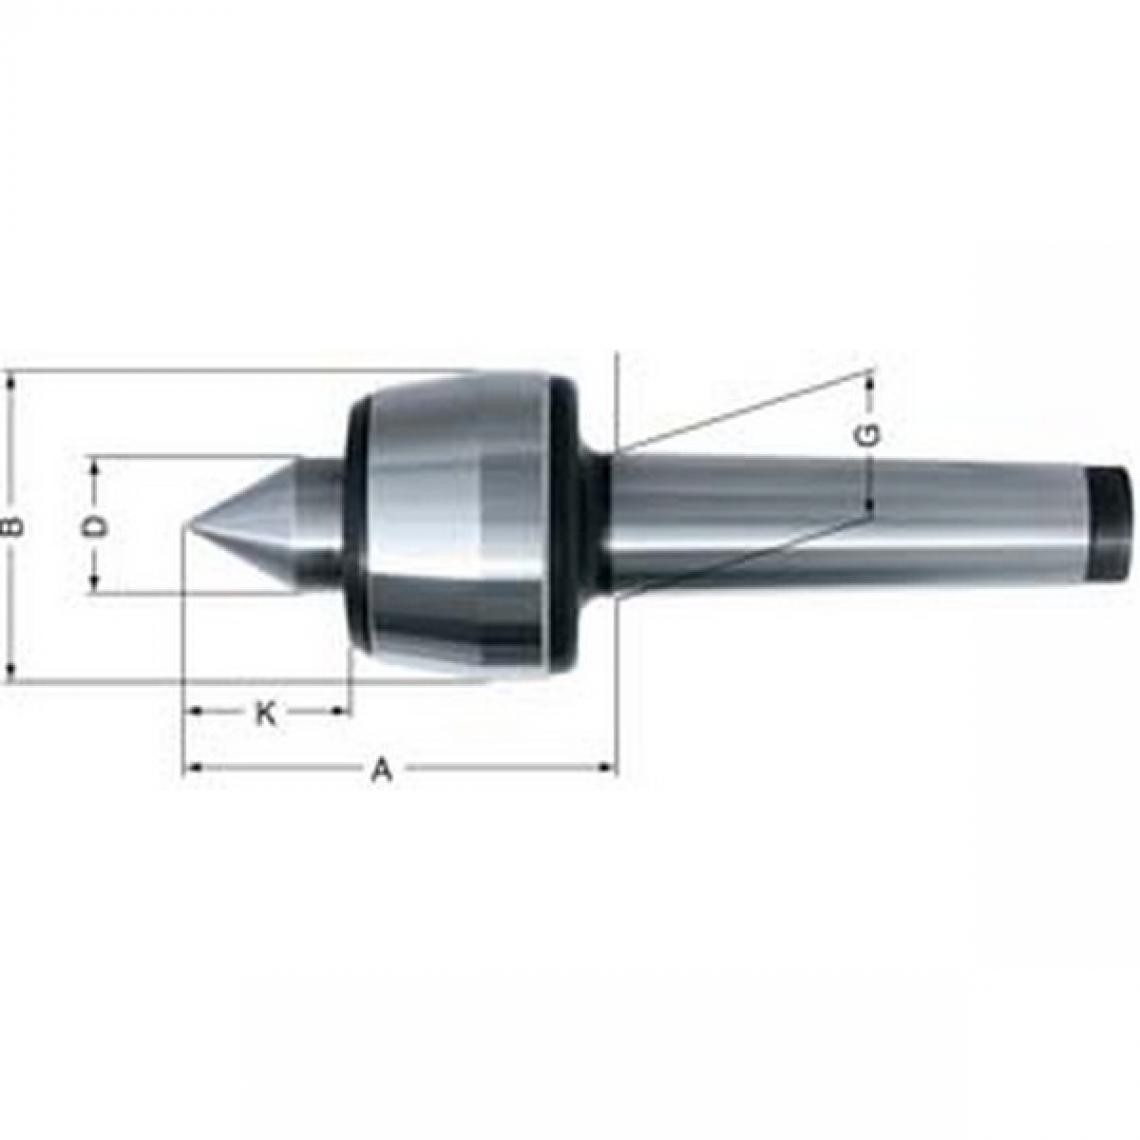 Rohm - Pointe tournante n° 600, Taille : 02, MK 2, A 62,0 mm, B : 32 mm, D : 15 mm, G : 17,780 mm, K : 18 mm - Pointes à tracer, cordeaux, marquage